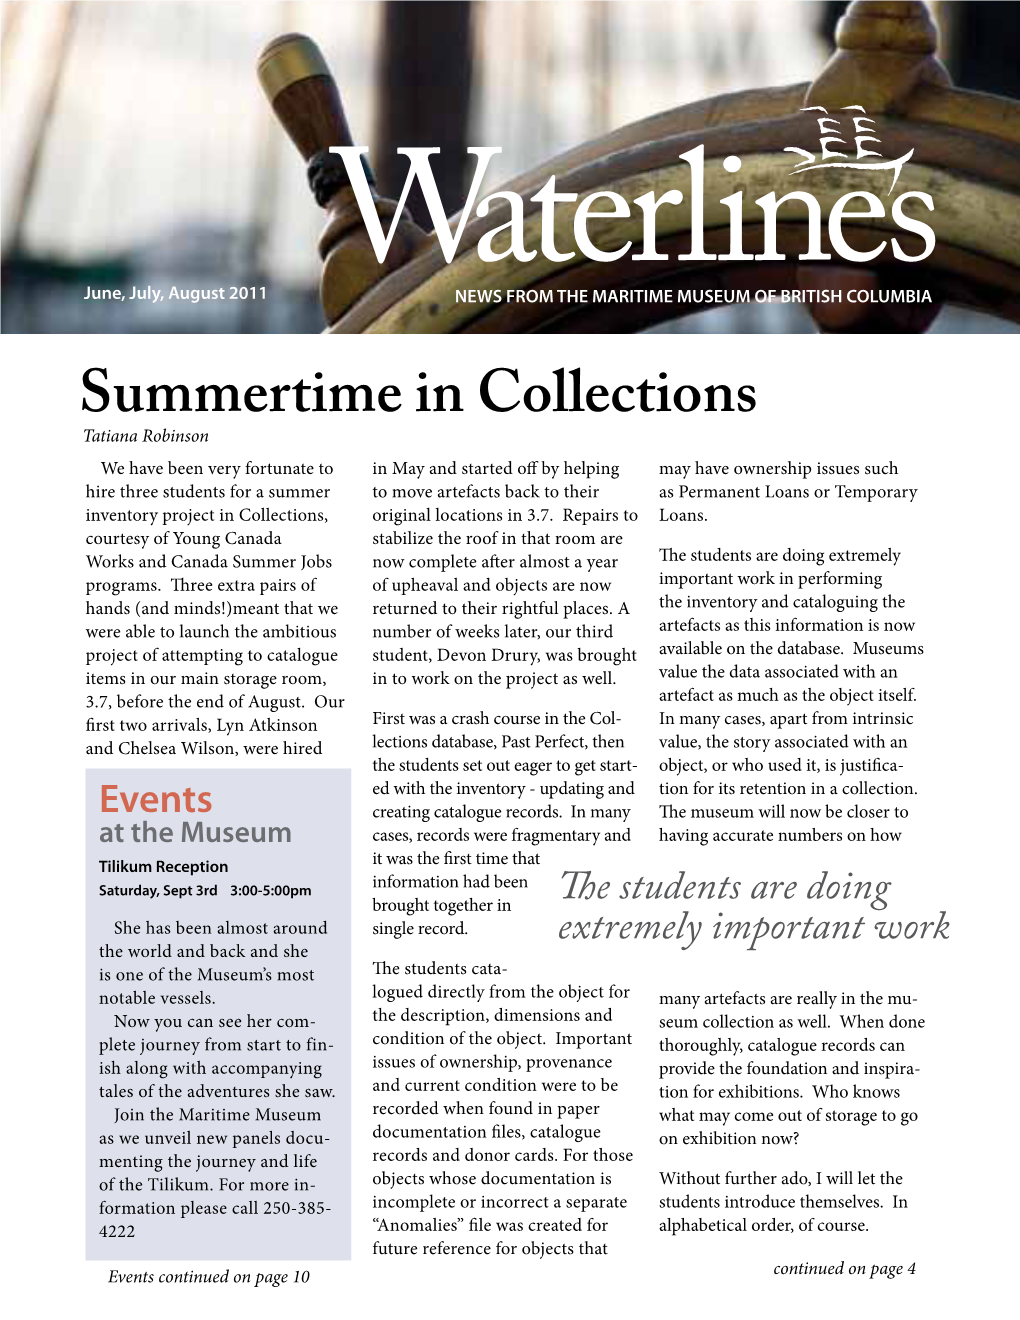 Summertime in Collections